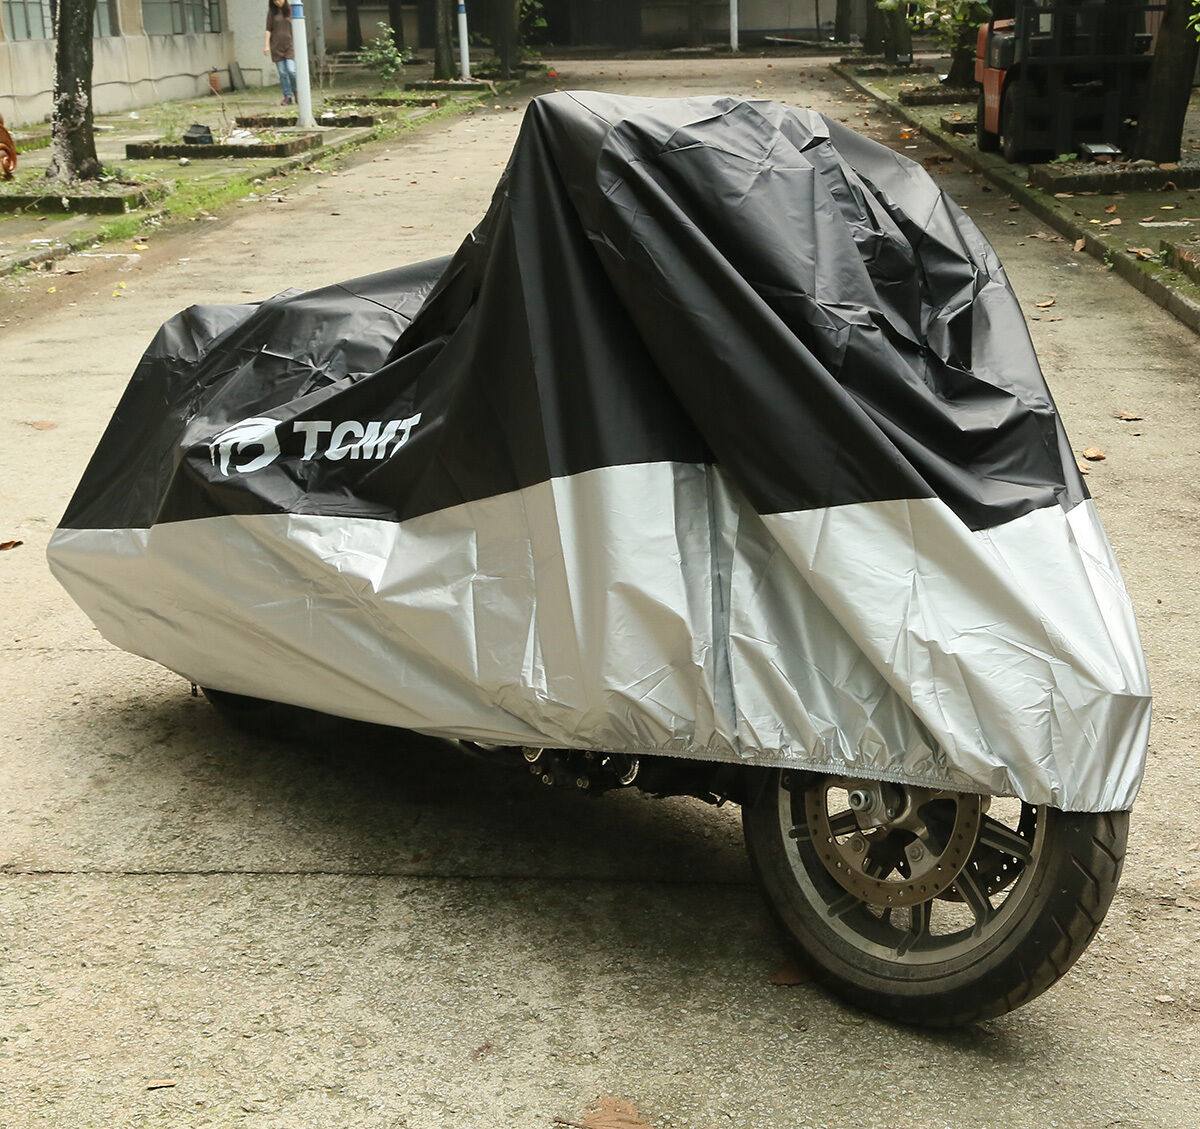 XL Waterproof ATV Motorcycle Cover For Harley Dyna Fat Bob FXDF Street Bob Glide - Moto Life Products